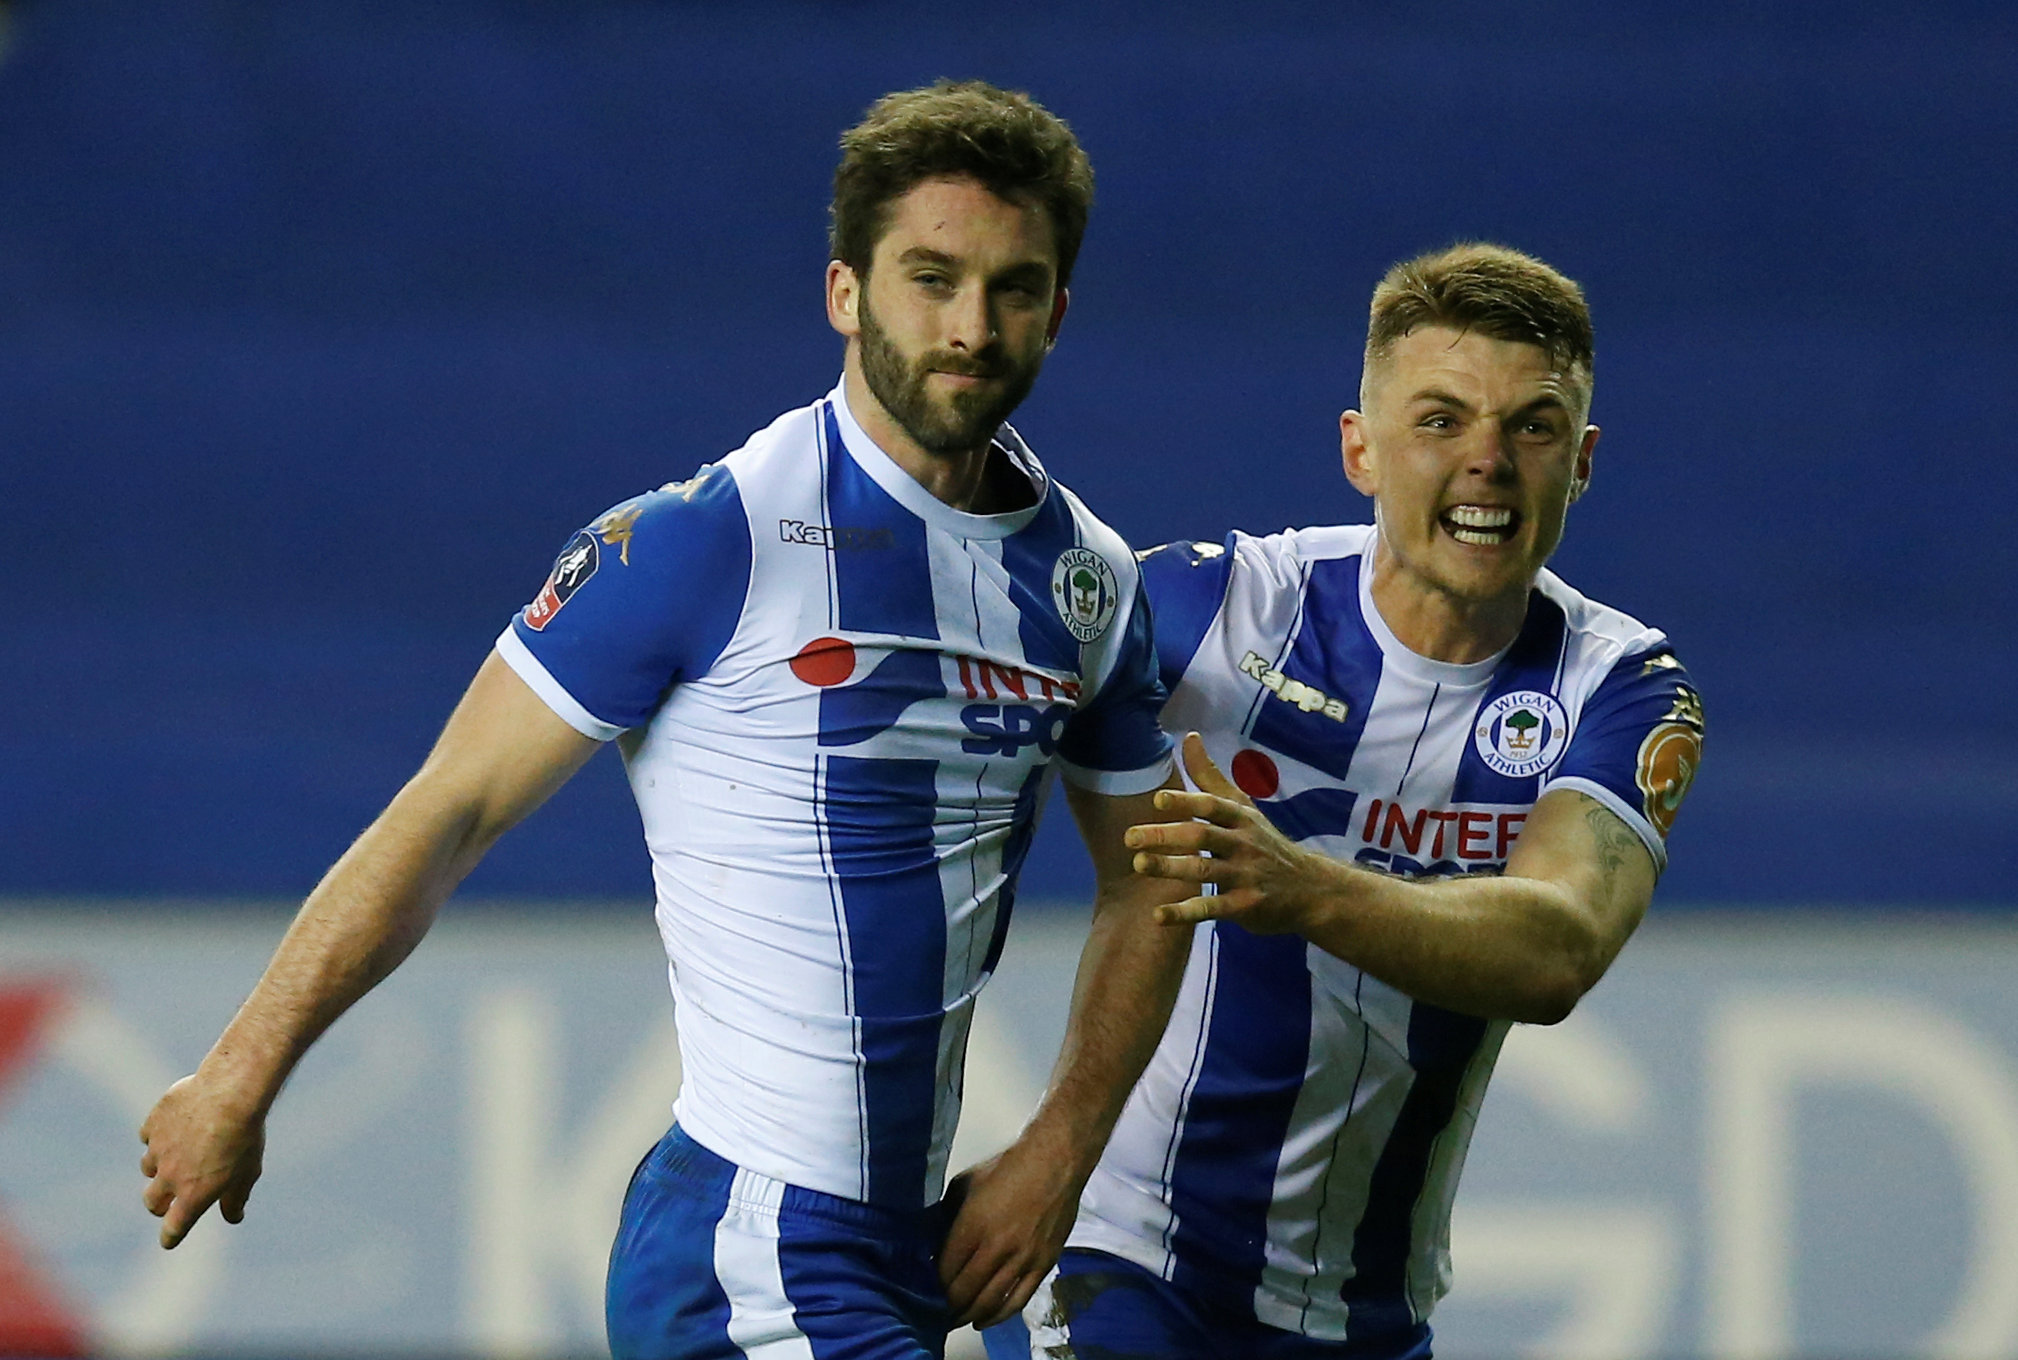 Football: 'It's nice and easy' for Grigg as Wigan stun City